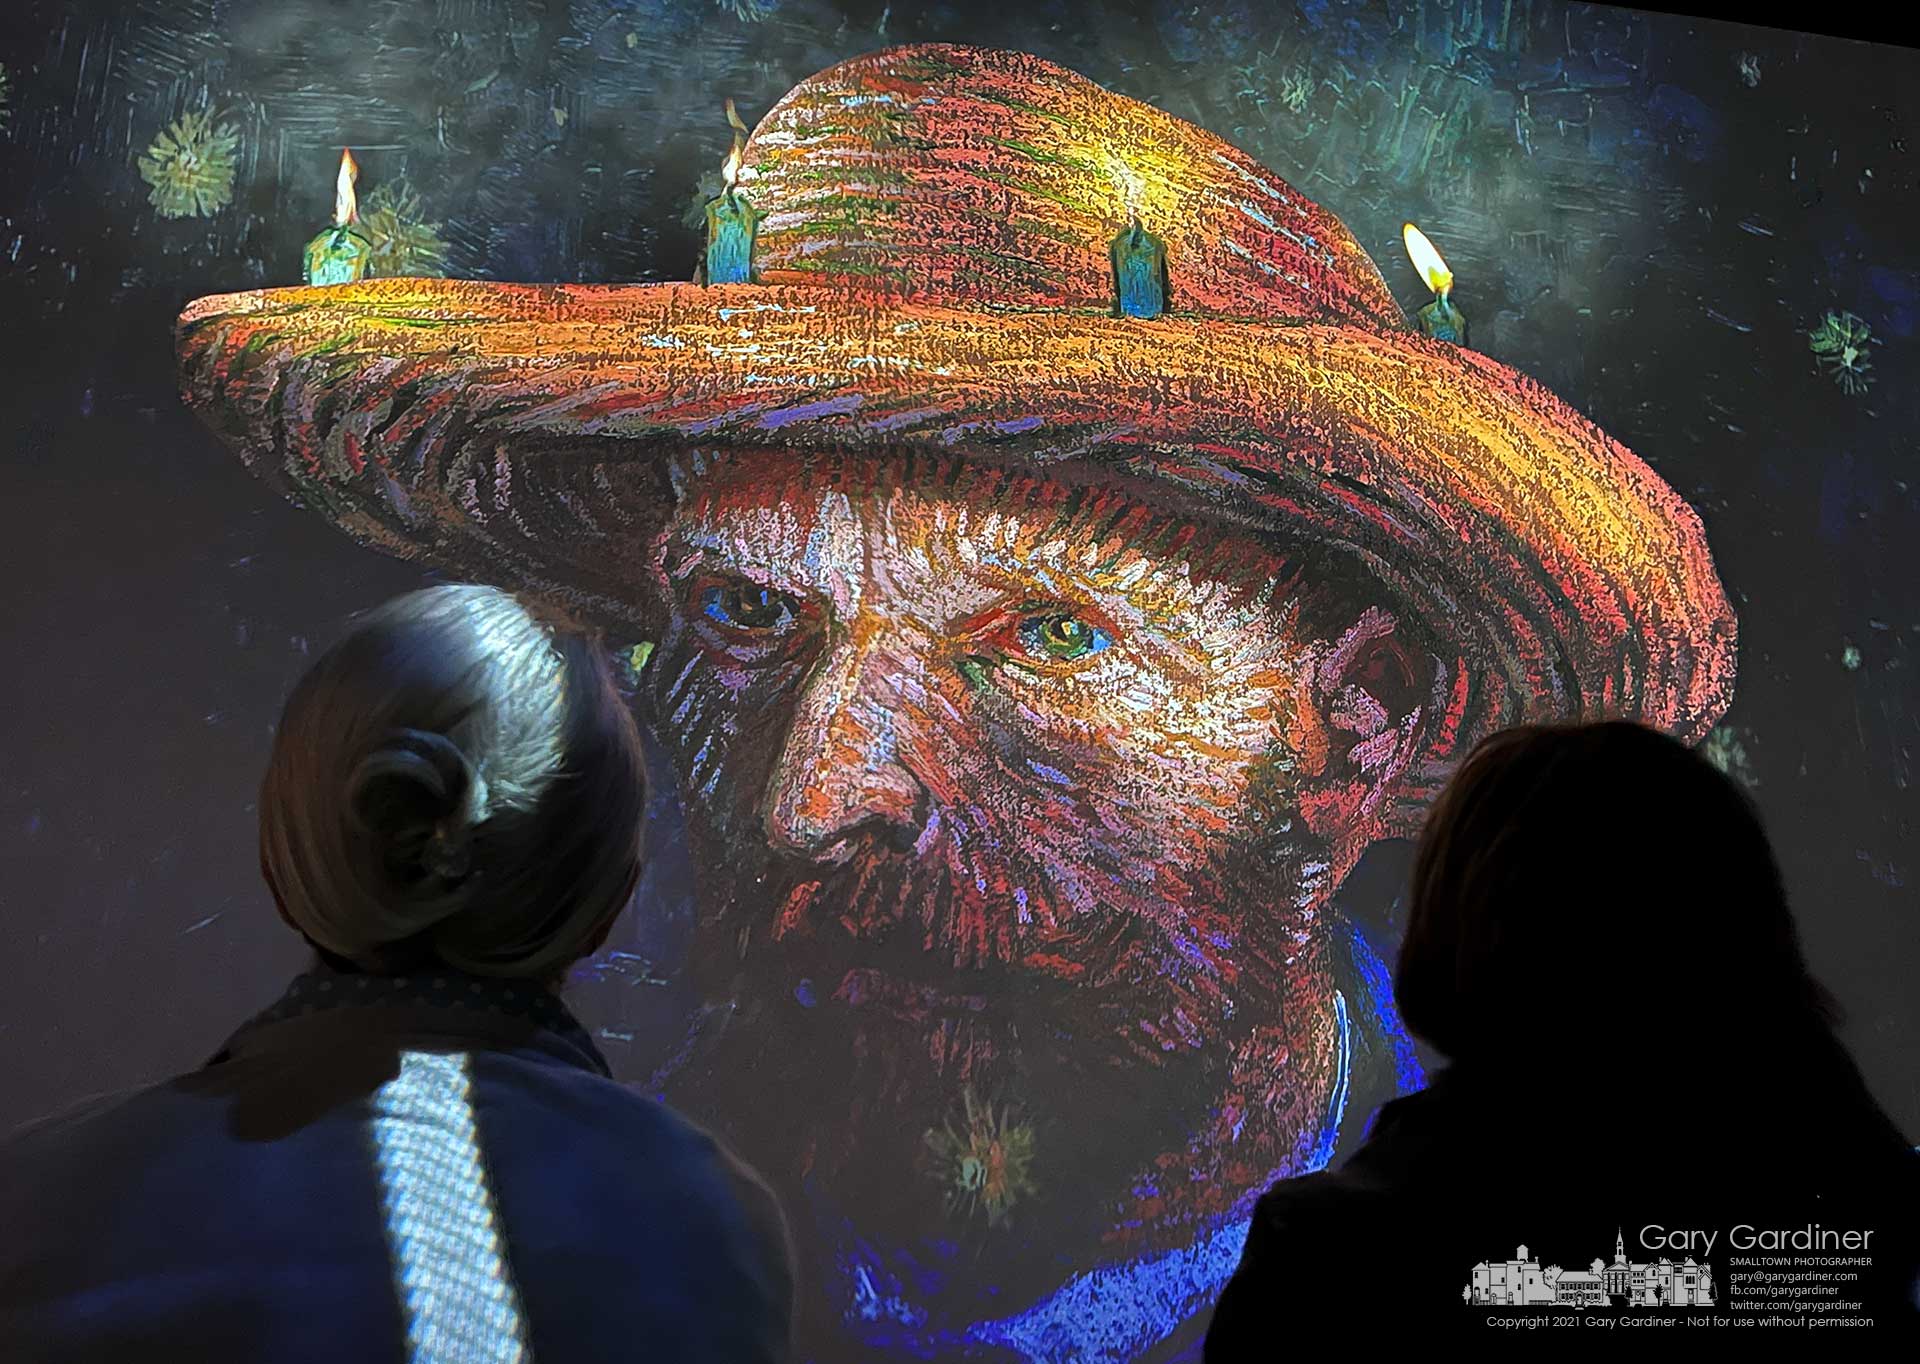 Two women study a portrait of Vincent Van Gogh during the Immersive Van Gogh multimedia show in a closed furniture store converted into a modern digital museum. My Final Photo for Nov. 9, 2021.